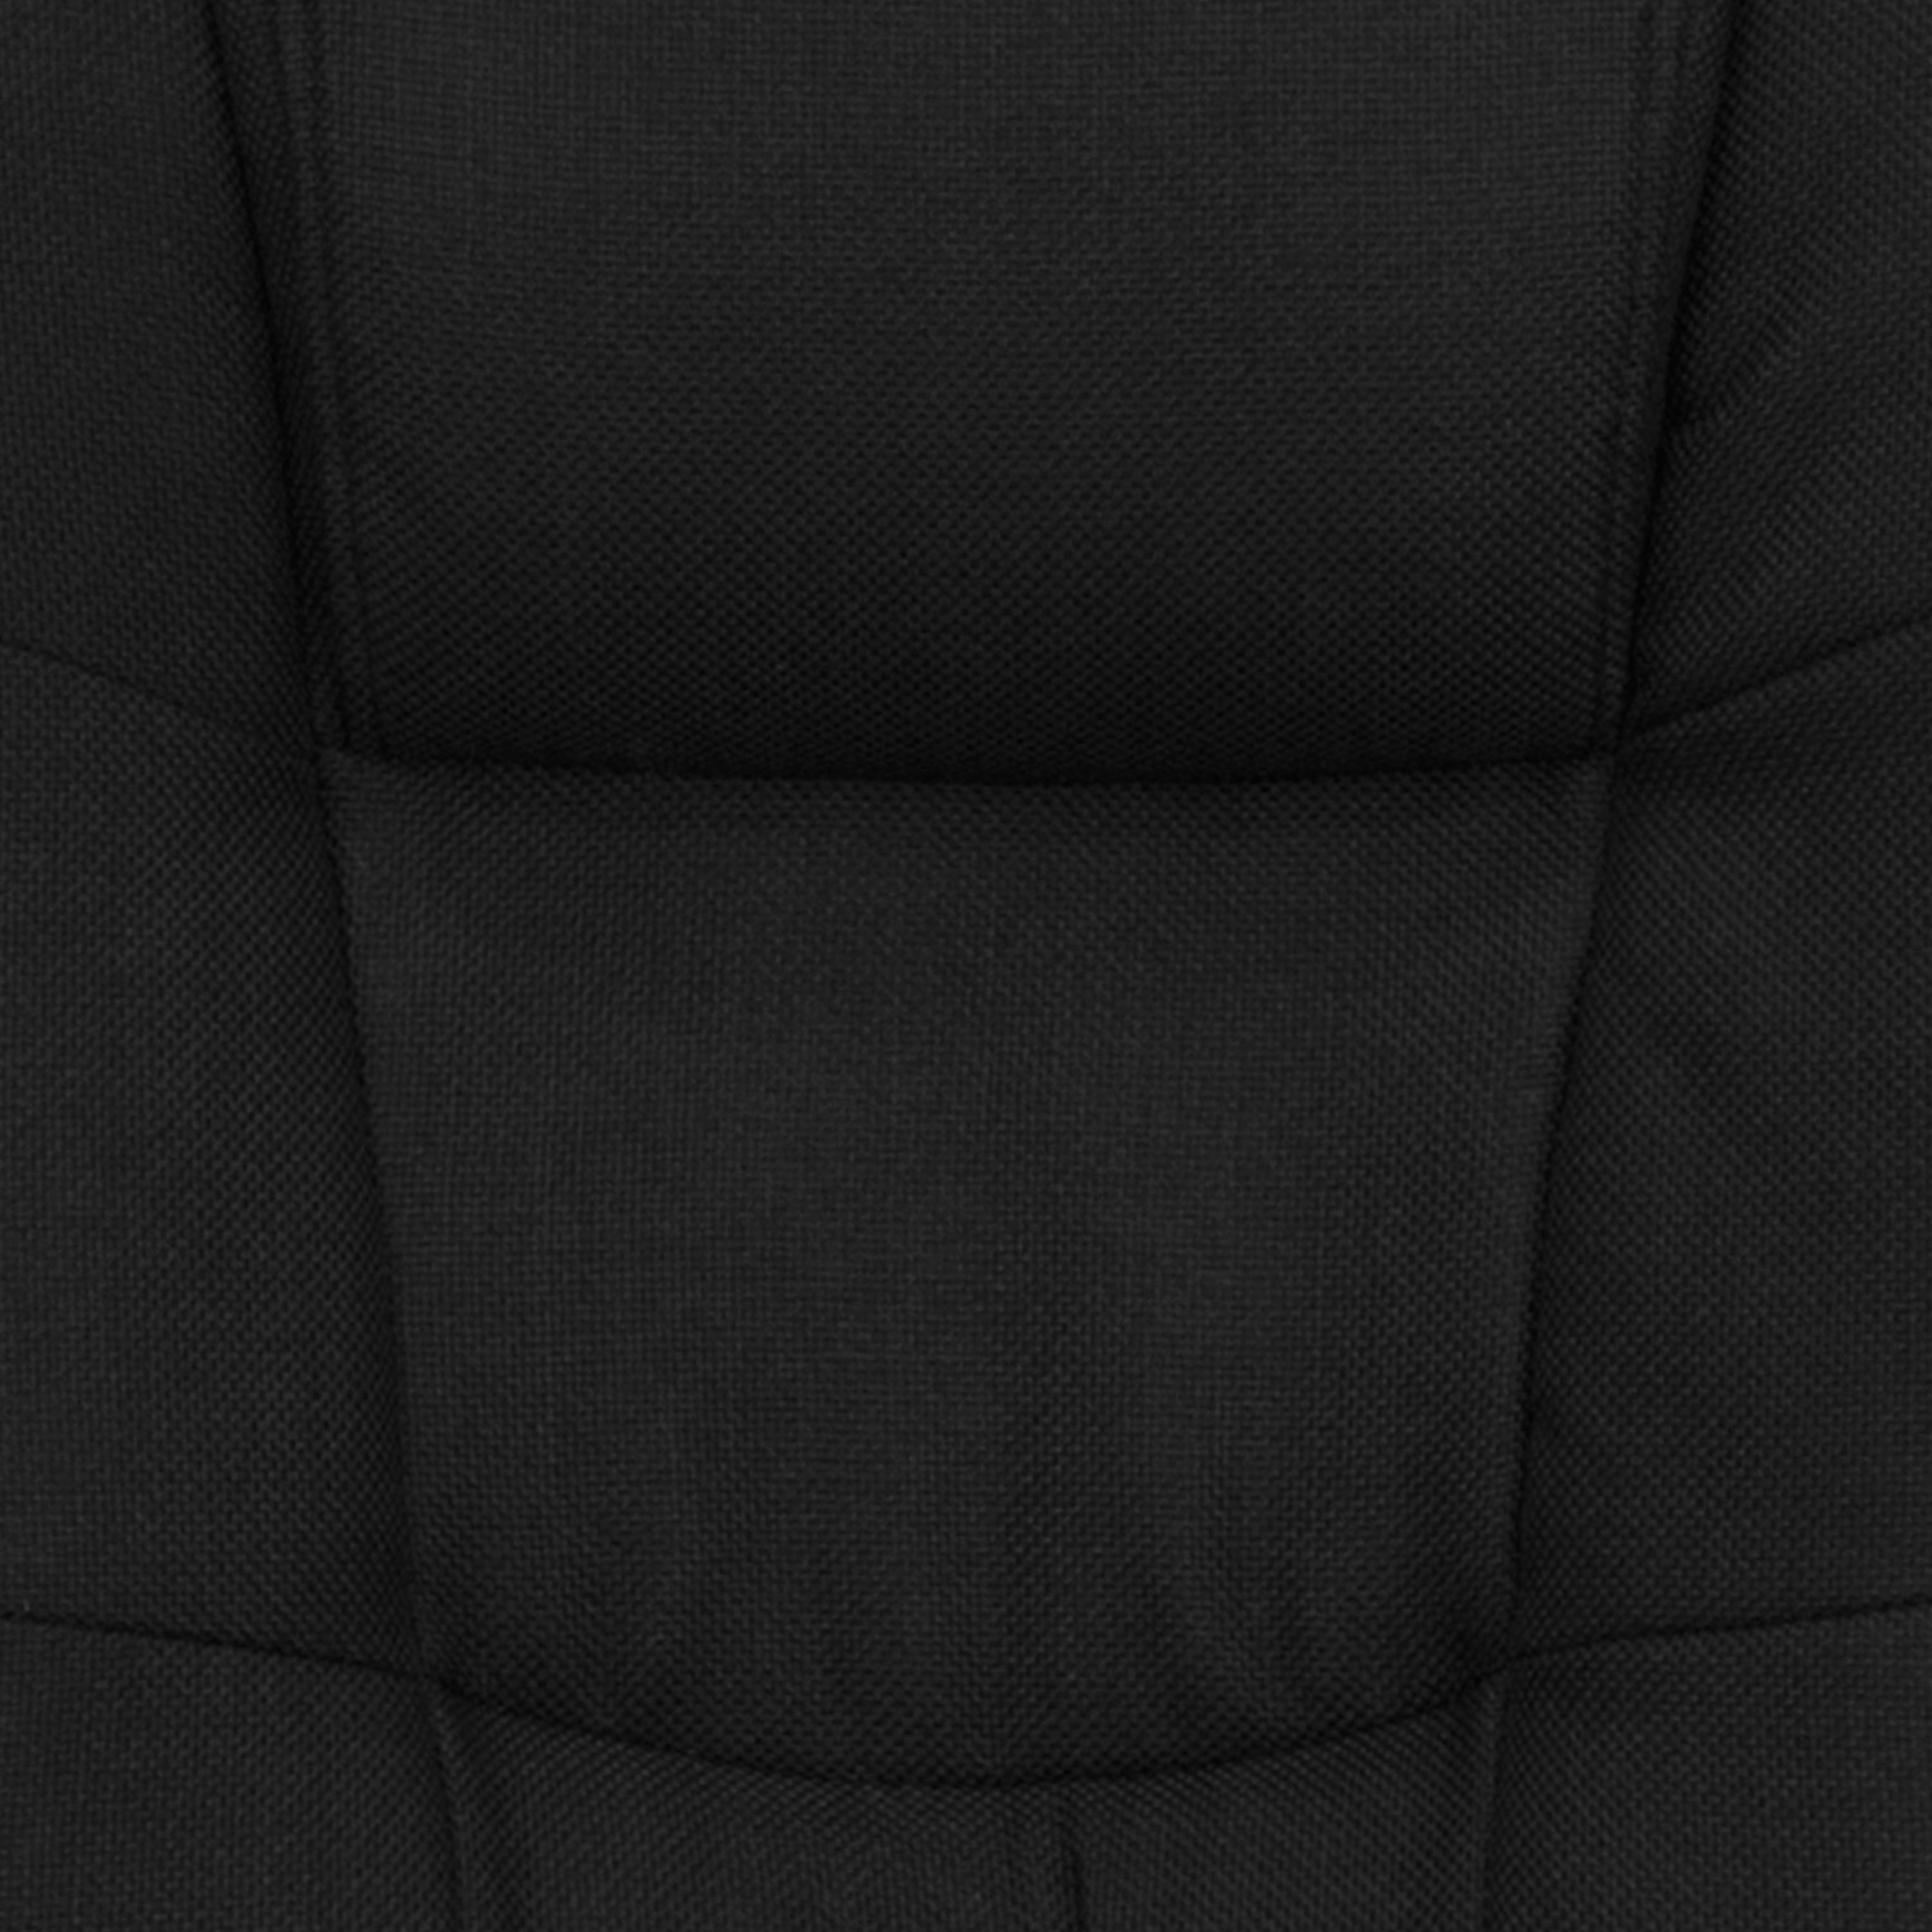 High Back Multi-Line Stitch Upholstered Executive Swivel Office Chair with Arms-Office Chair-Flash Furniture-Wall2Wall Furnishings